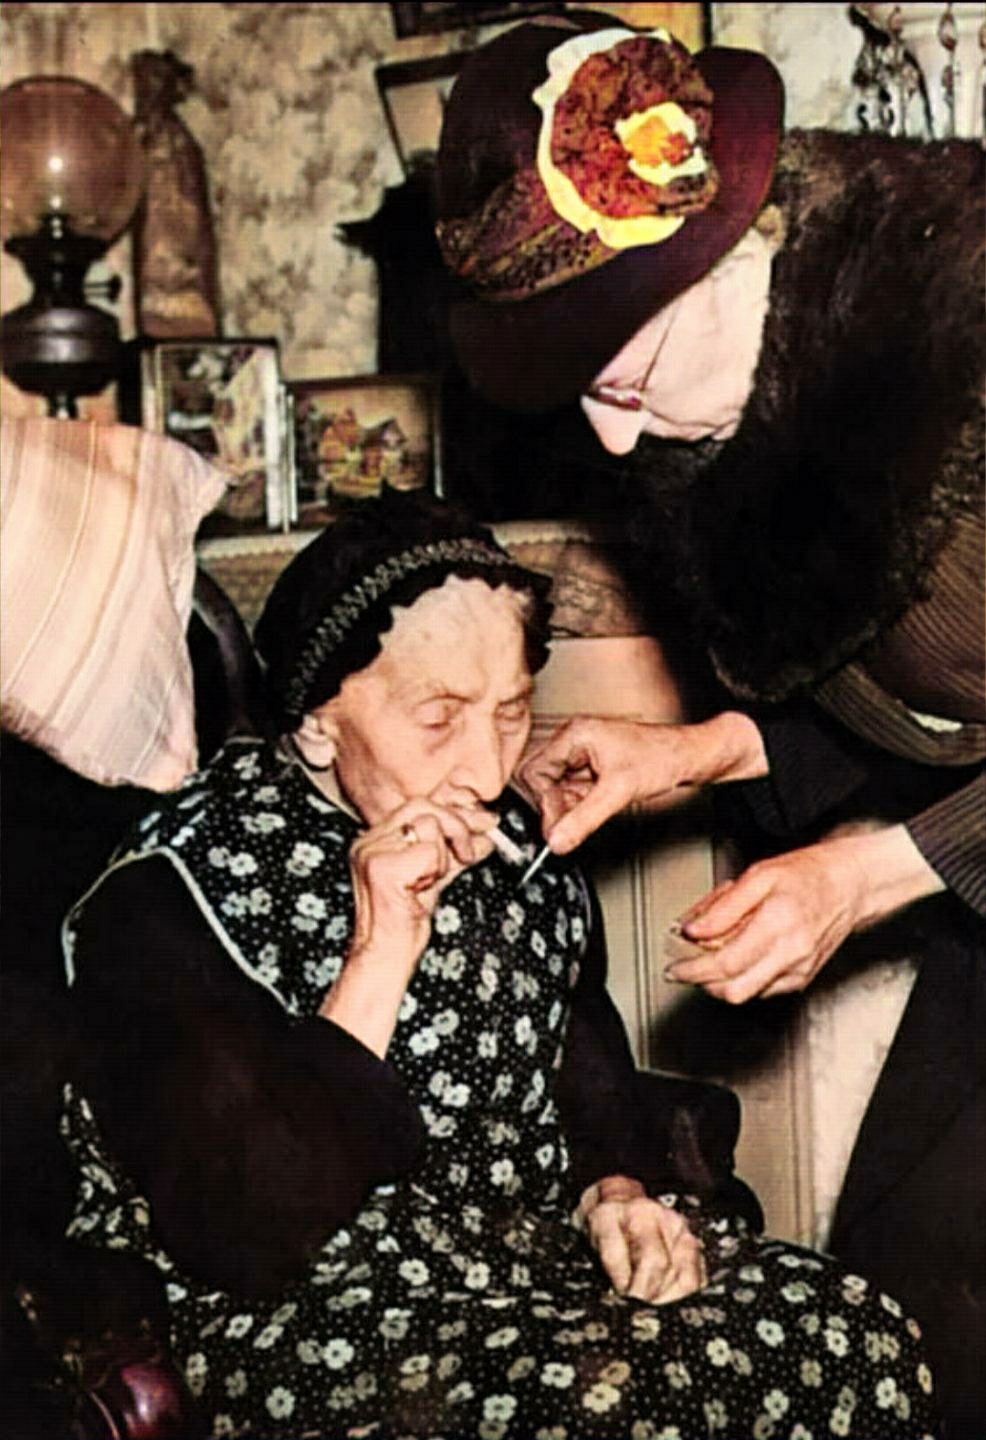 Mary Parish, 75, lights a cigarette for her 101-year-old mother. - The photo, Old photo, Black and white photo, Parents and children, Long-liver, 40's, England, Longpost